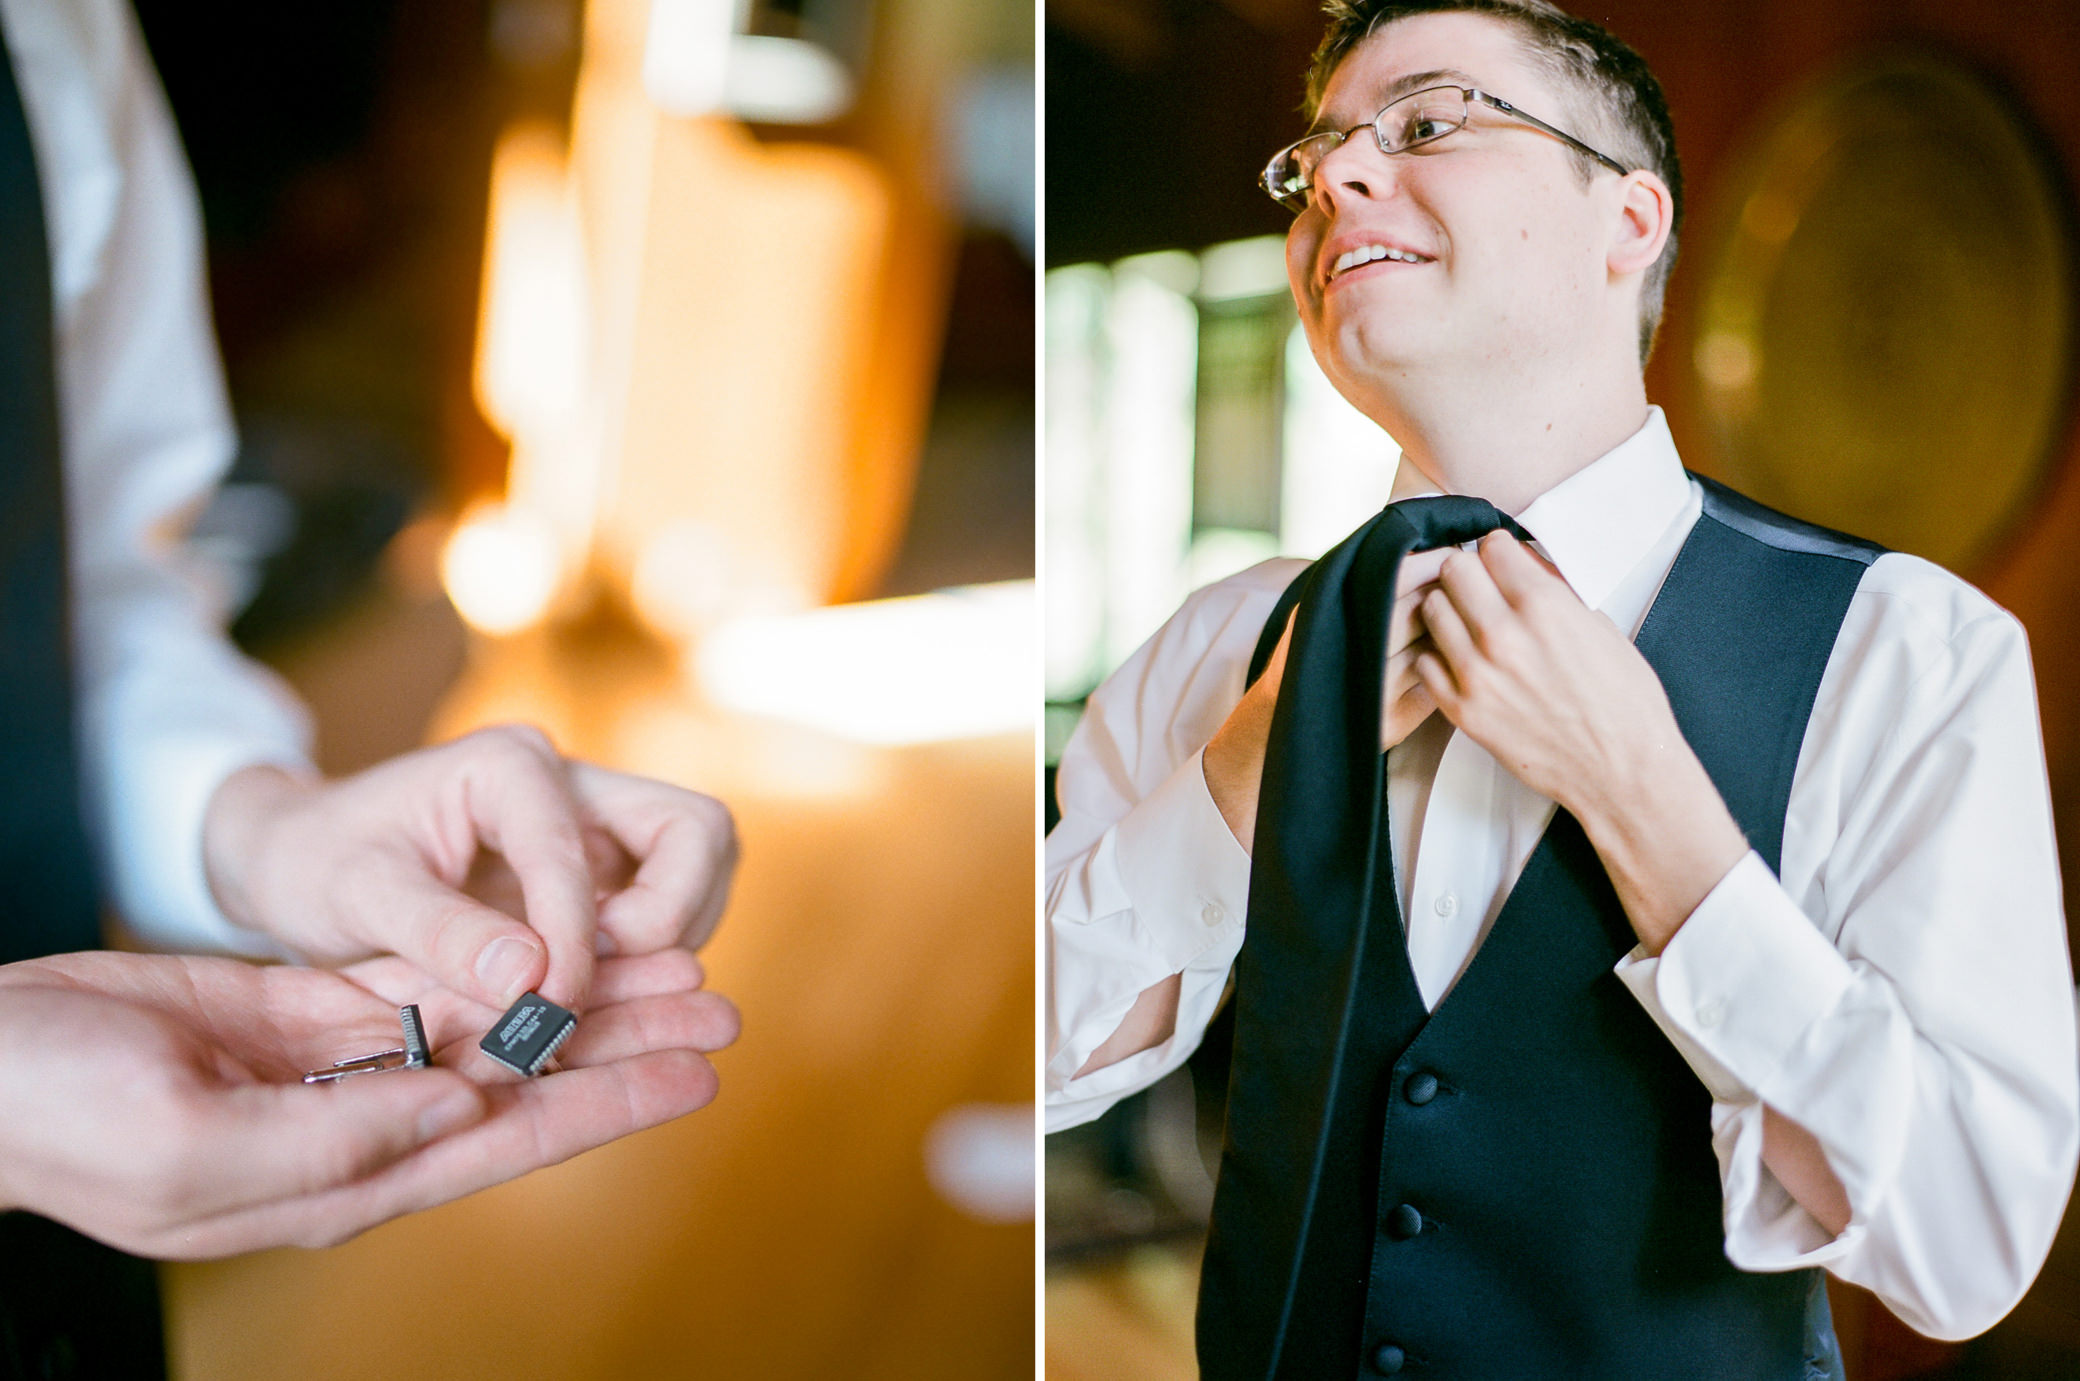 Katherine gave Graeme some cool computer chip cufflinks for their wedding day at KIngston House.